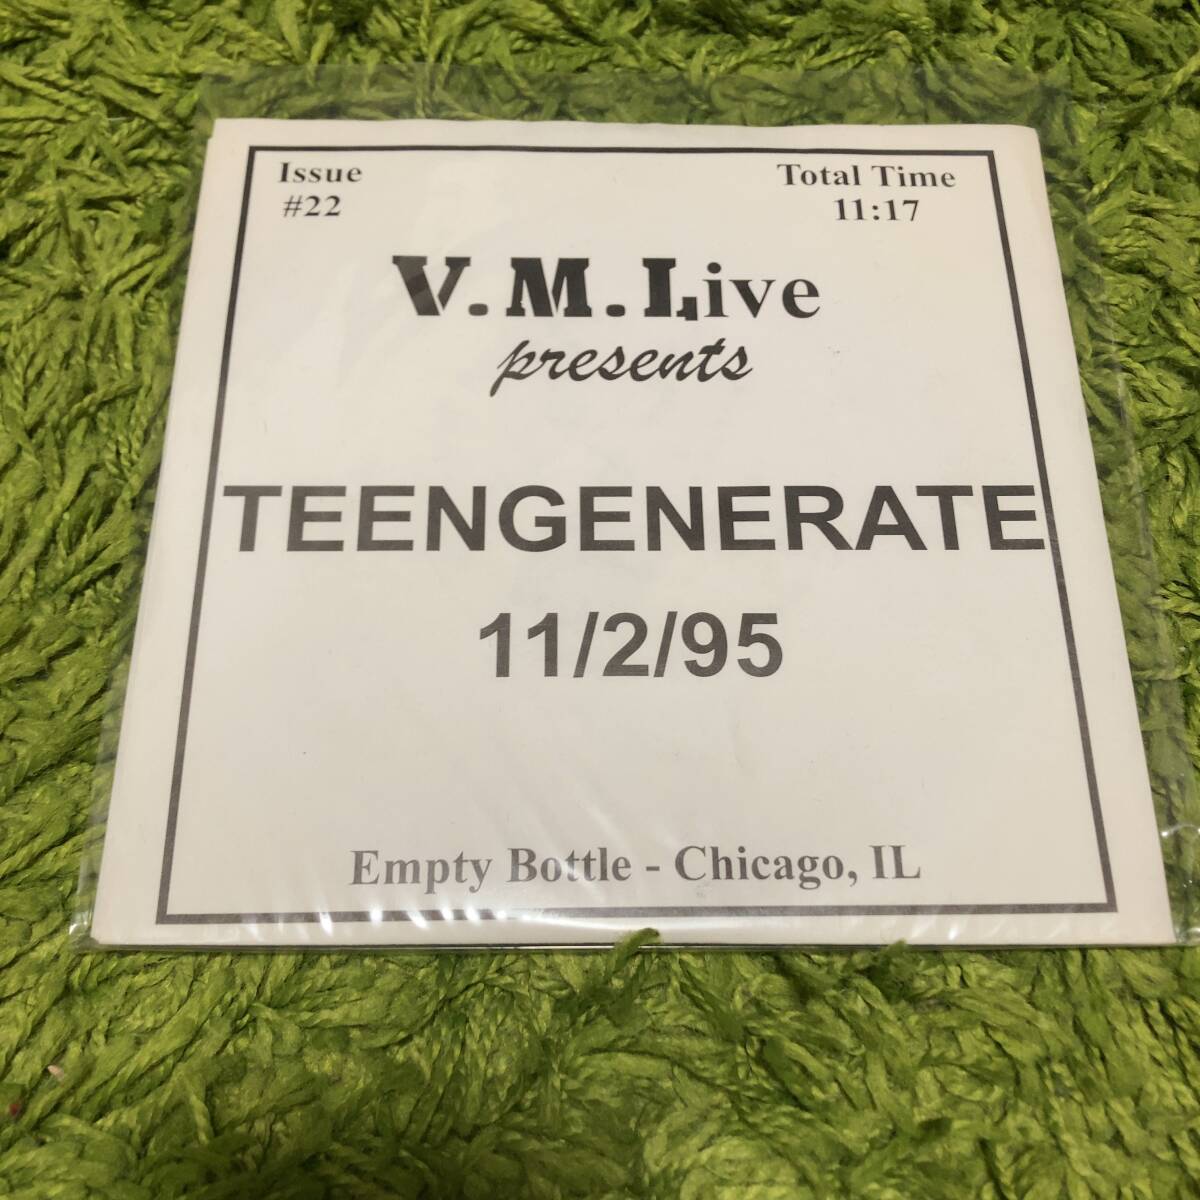 【Teengenerate - 11/2/95 (Empty Bottle - Chicago, IL)】mummies supercharger rip offs devil dogsの画像1